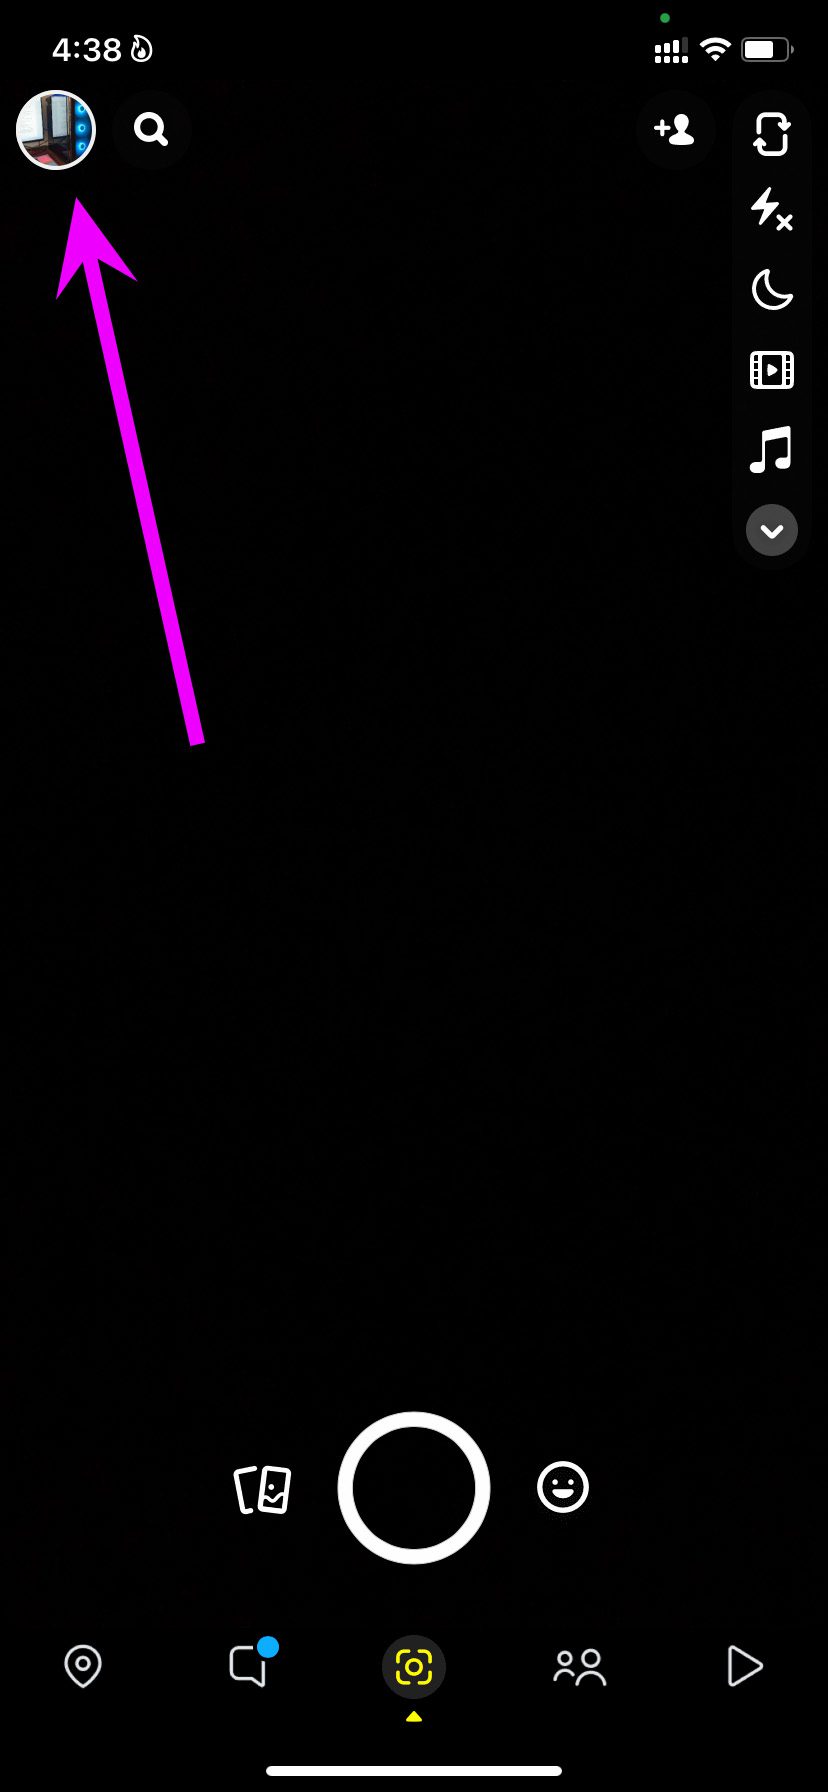 How to Hide Story from Someone on Snapchat